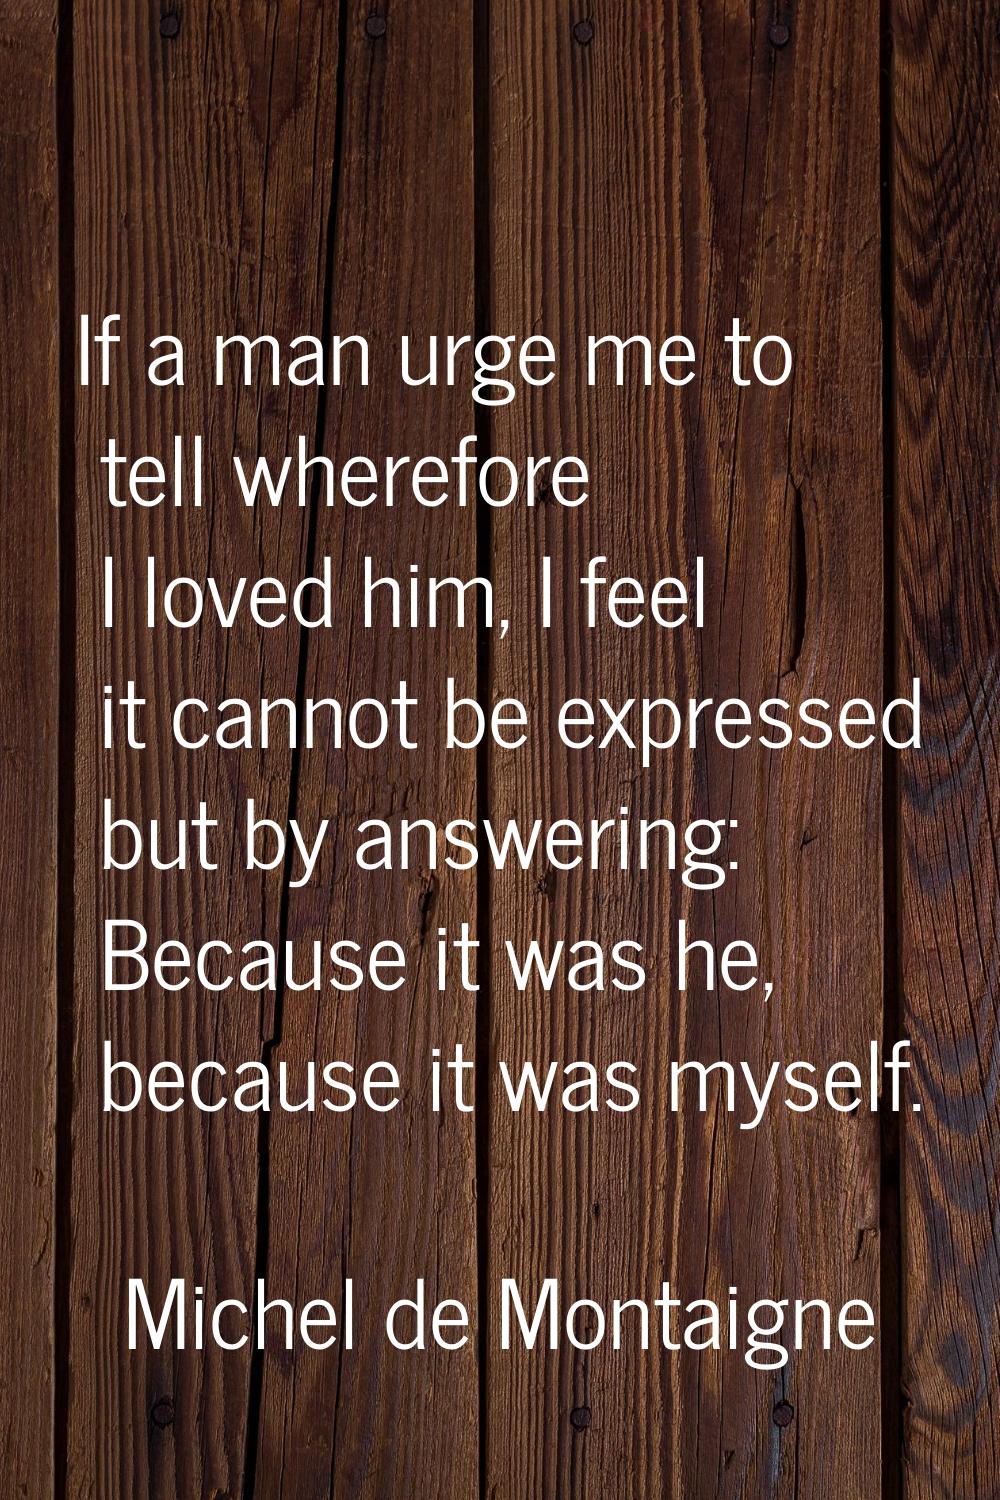 If a man urge me to tell wherefore I loved him, I feel it cannot be expressed but by answering: Bec